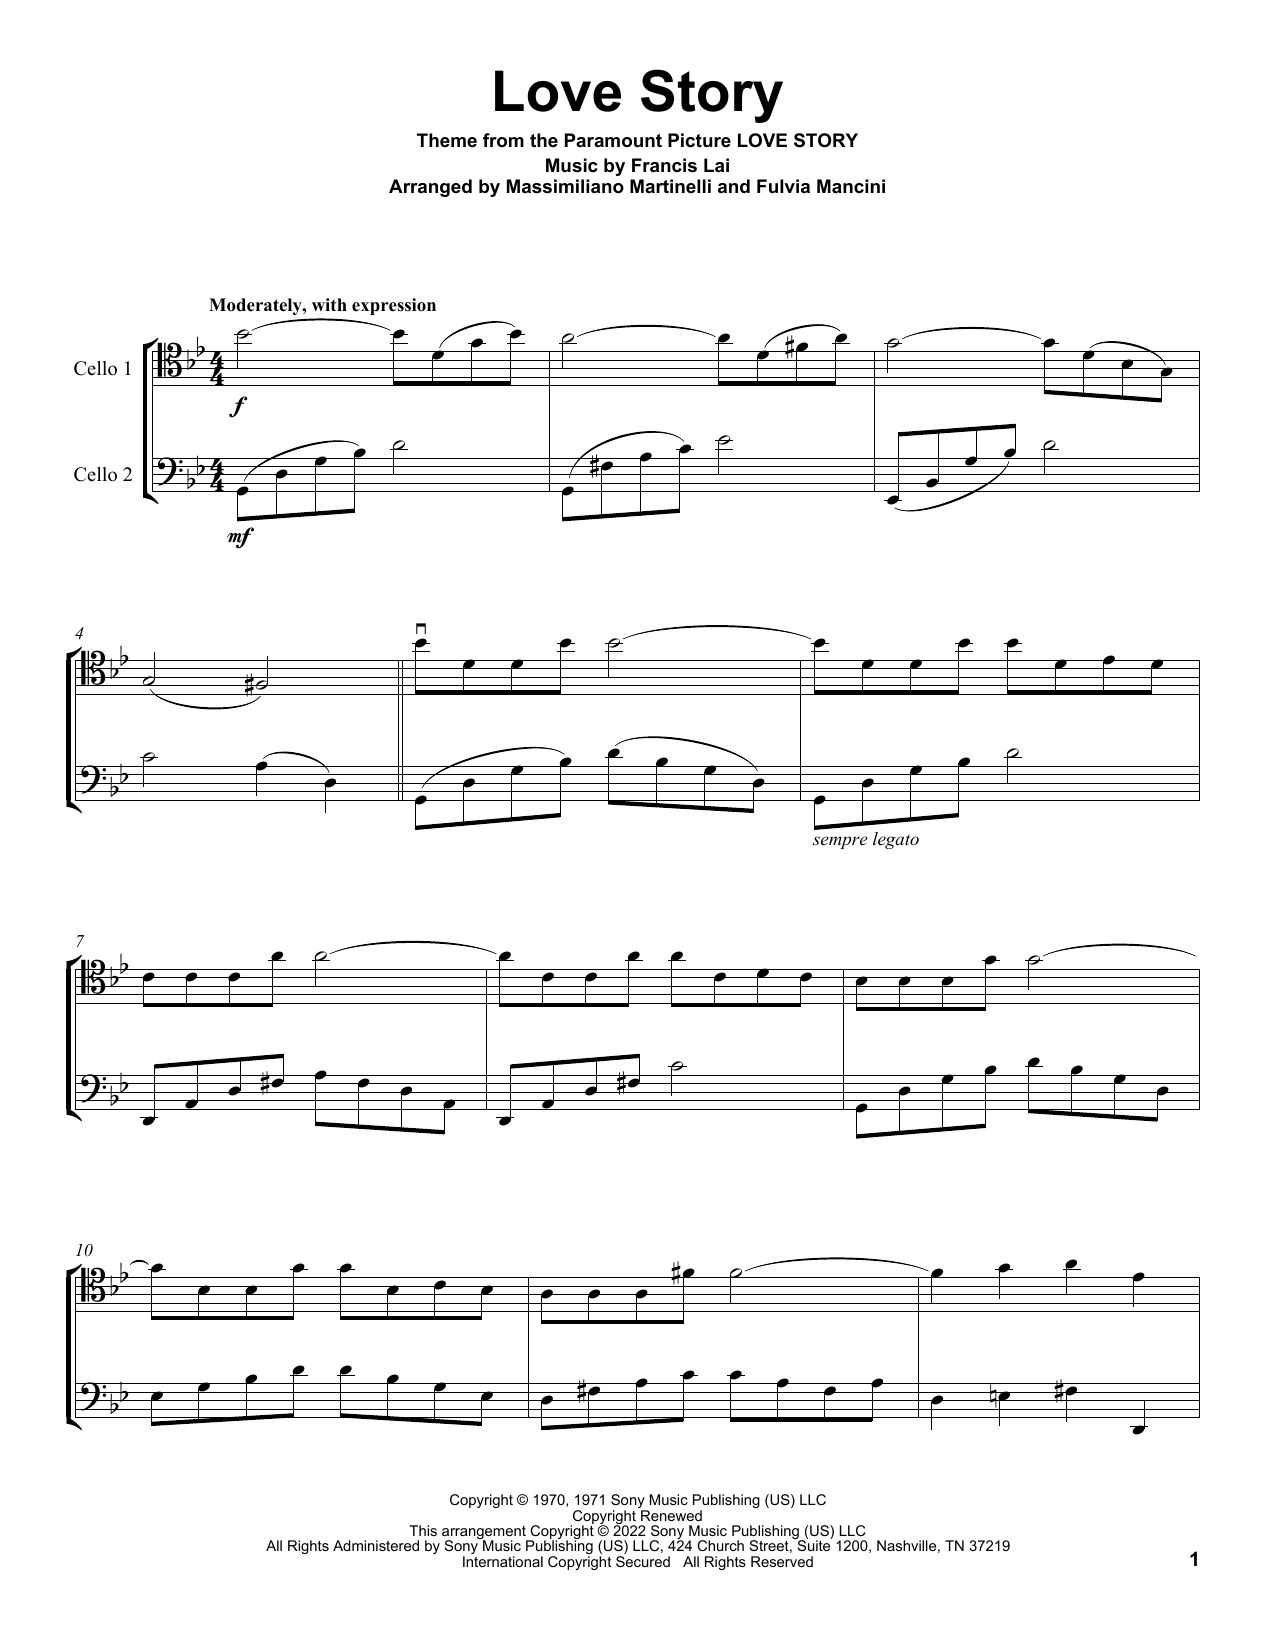 Download Mr & Mrs Cello Love Story (from Love Story) Sheet Music